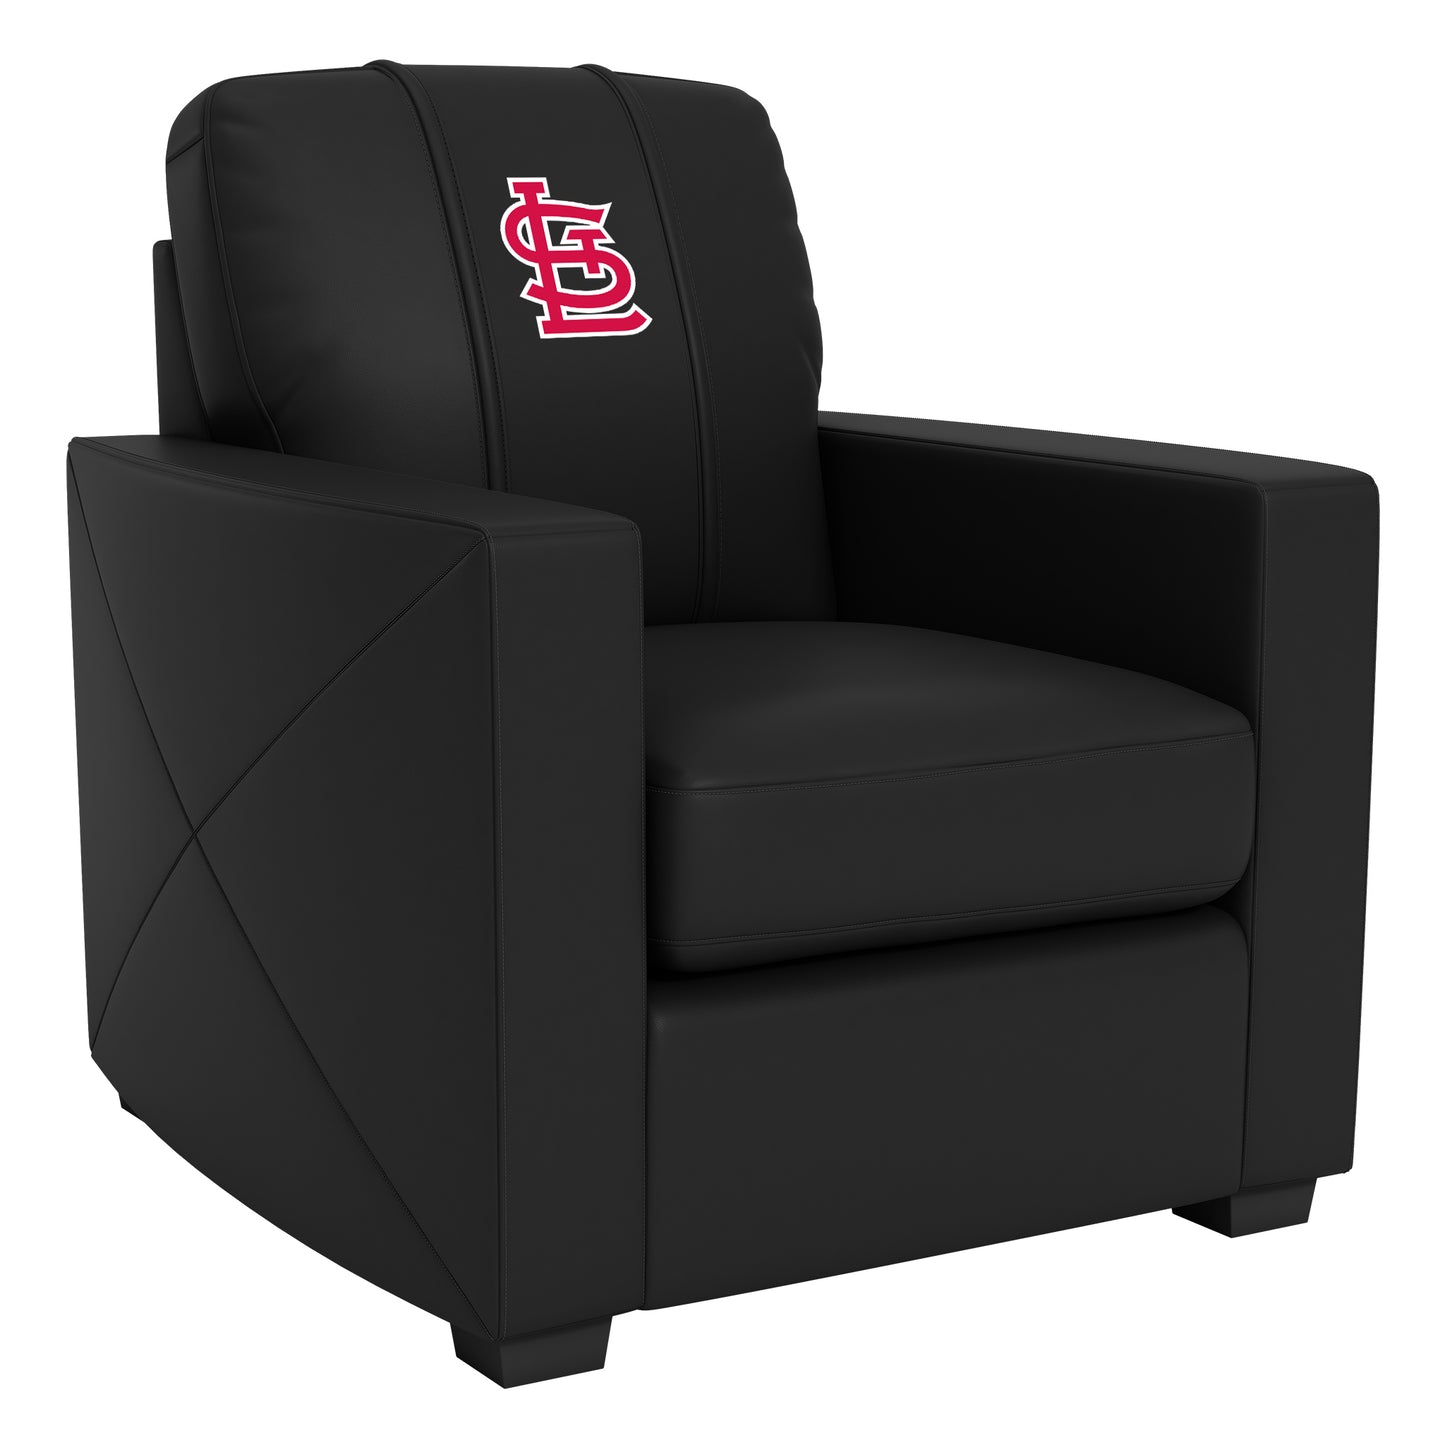 Silver Club Chair with St Louis Cardinals Secondary